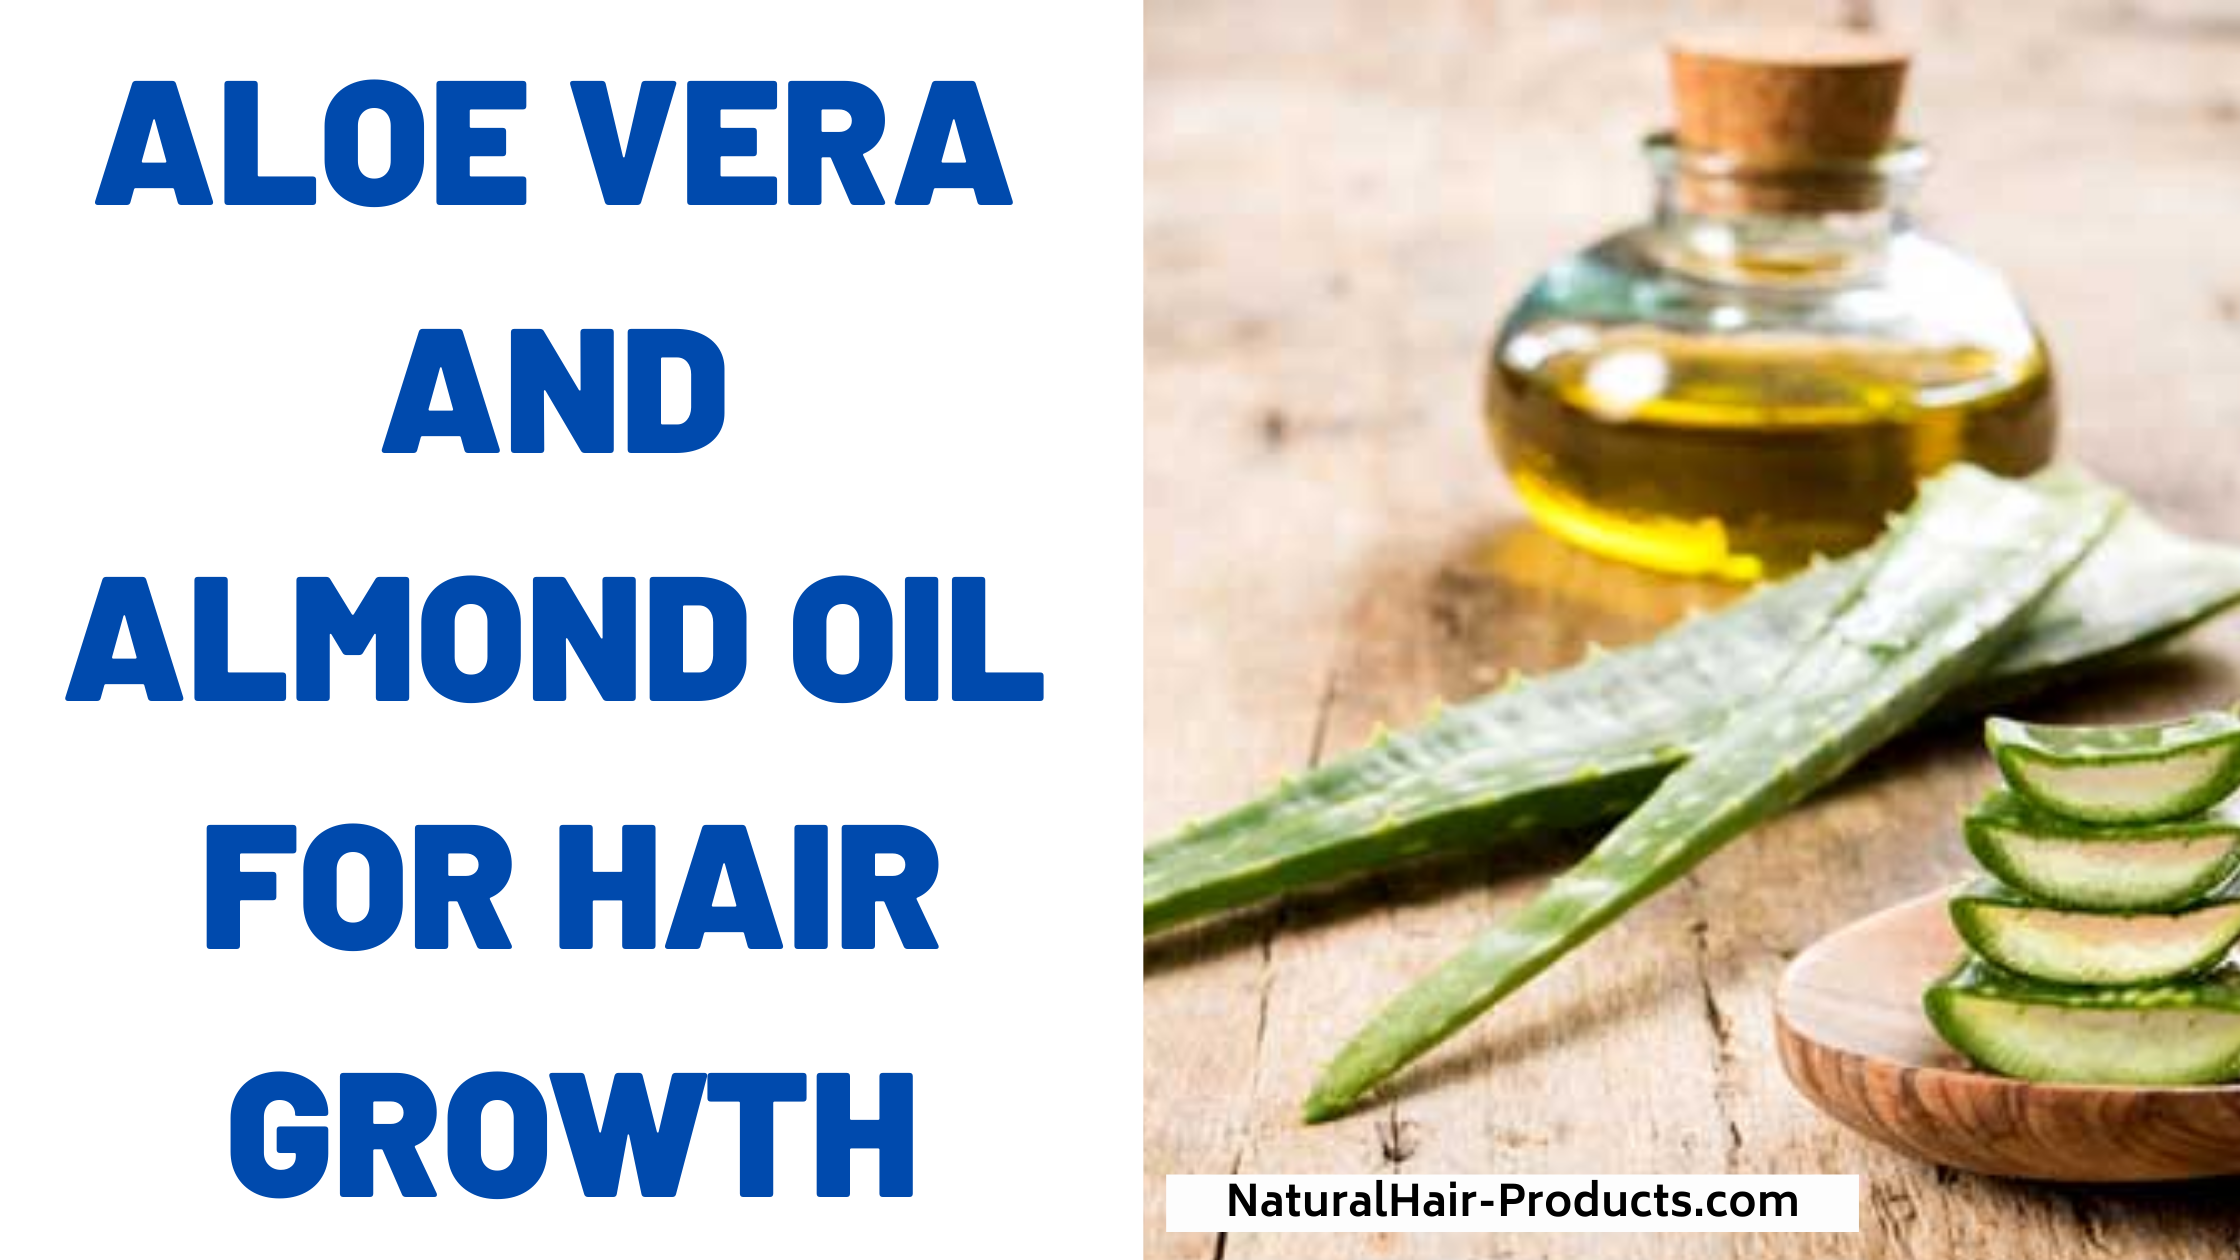 See how aloe vera and almond oil for hair growth will work to give you edges growth and less split ends...